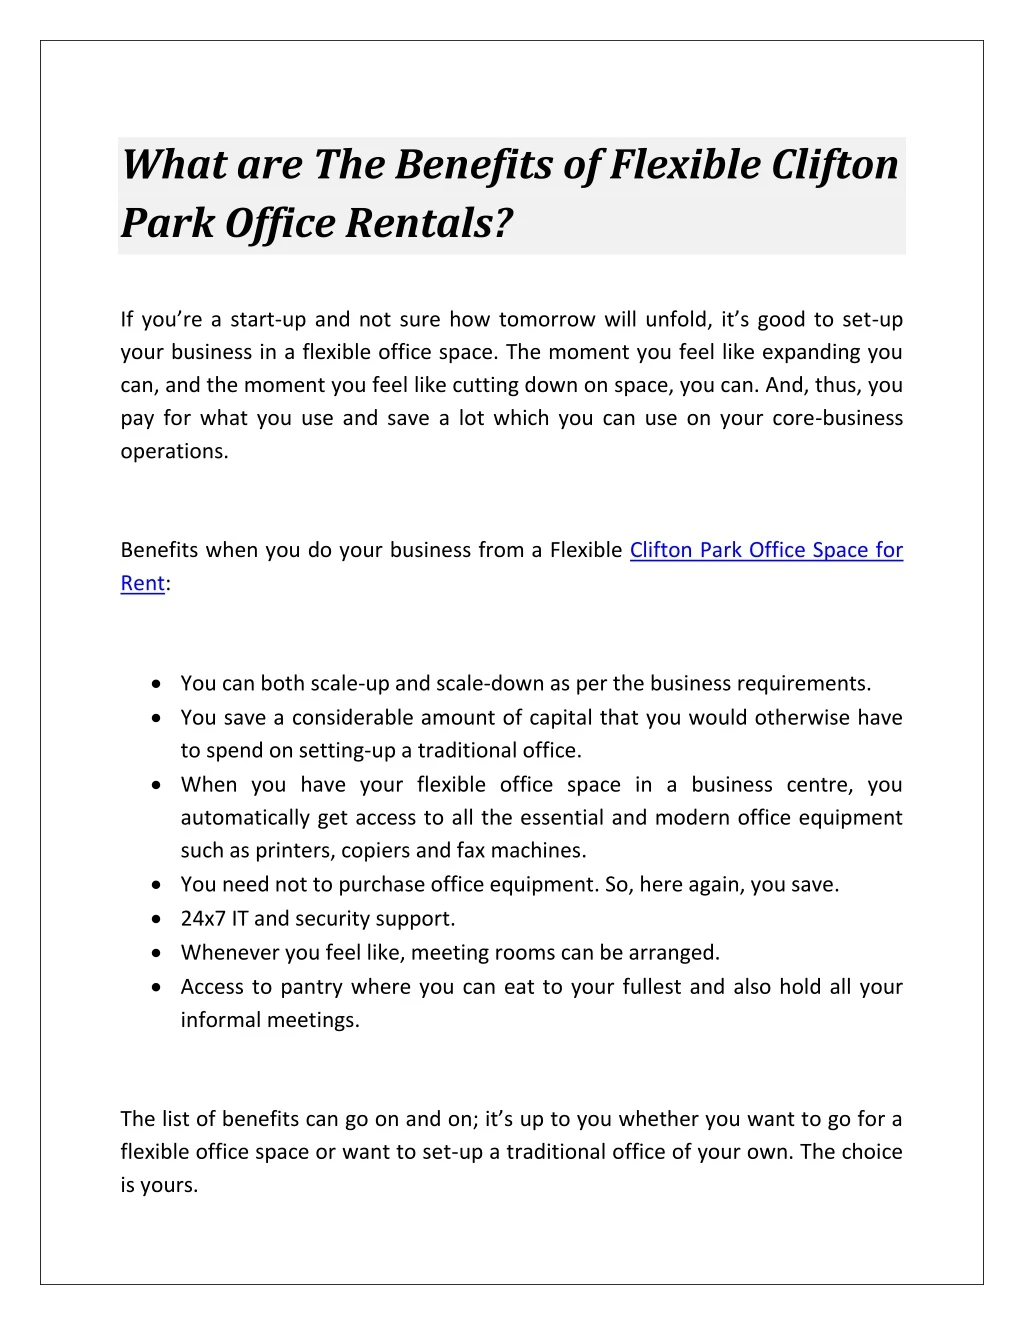 what are the benefits of flexible clifton park